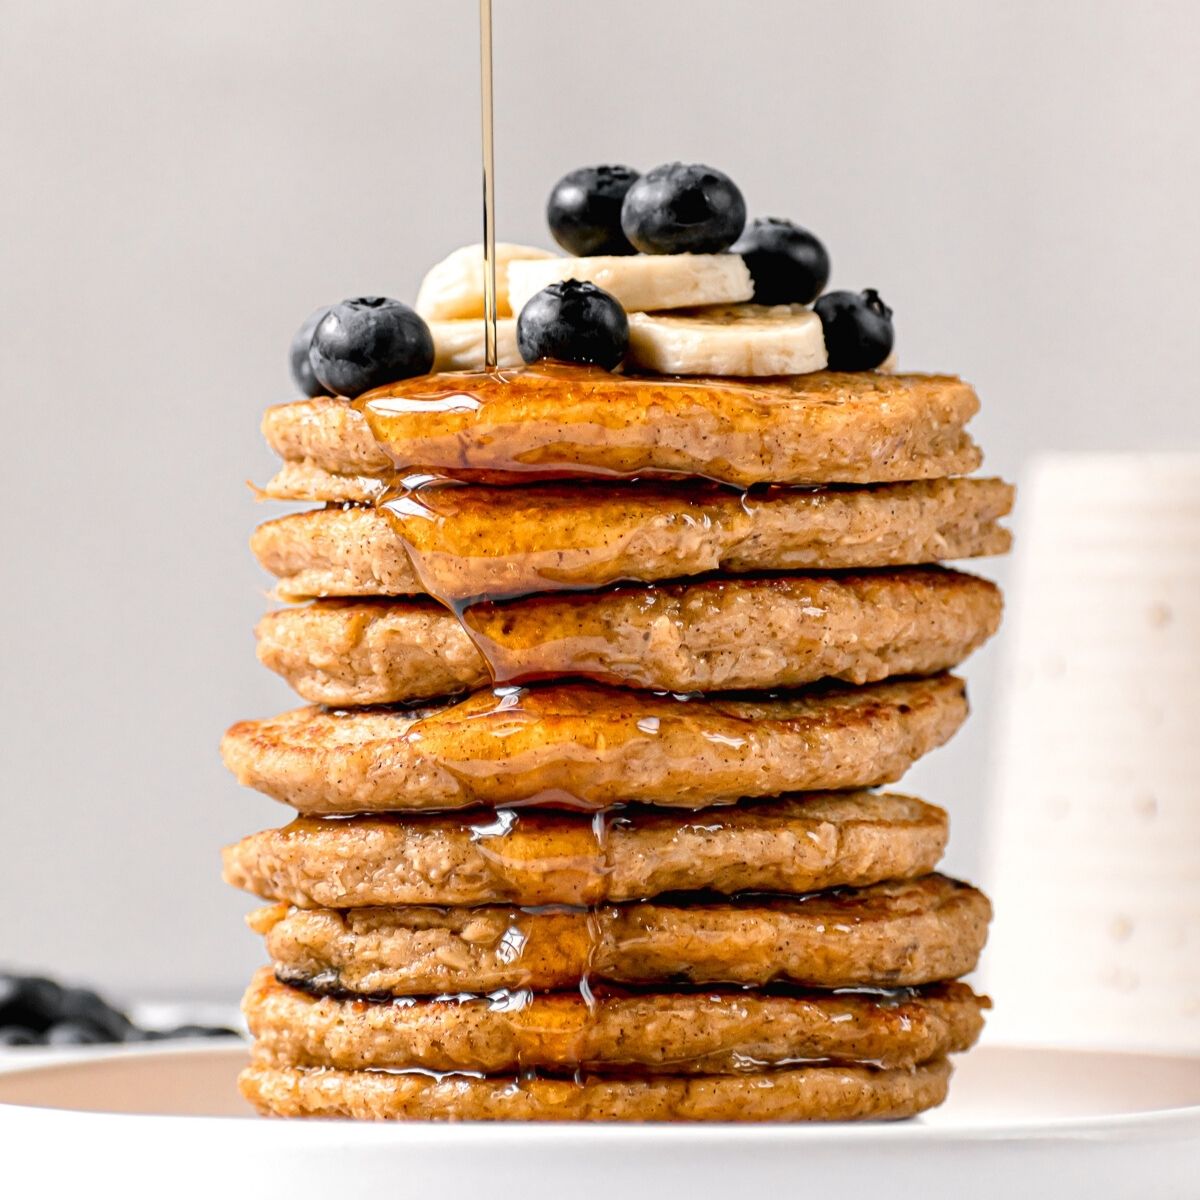 5 Ingredient Protein Pancakes Recipe - The Protein Chef